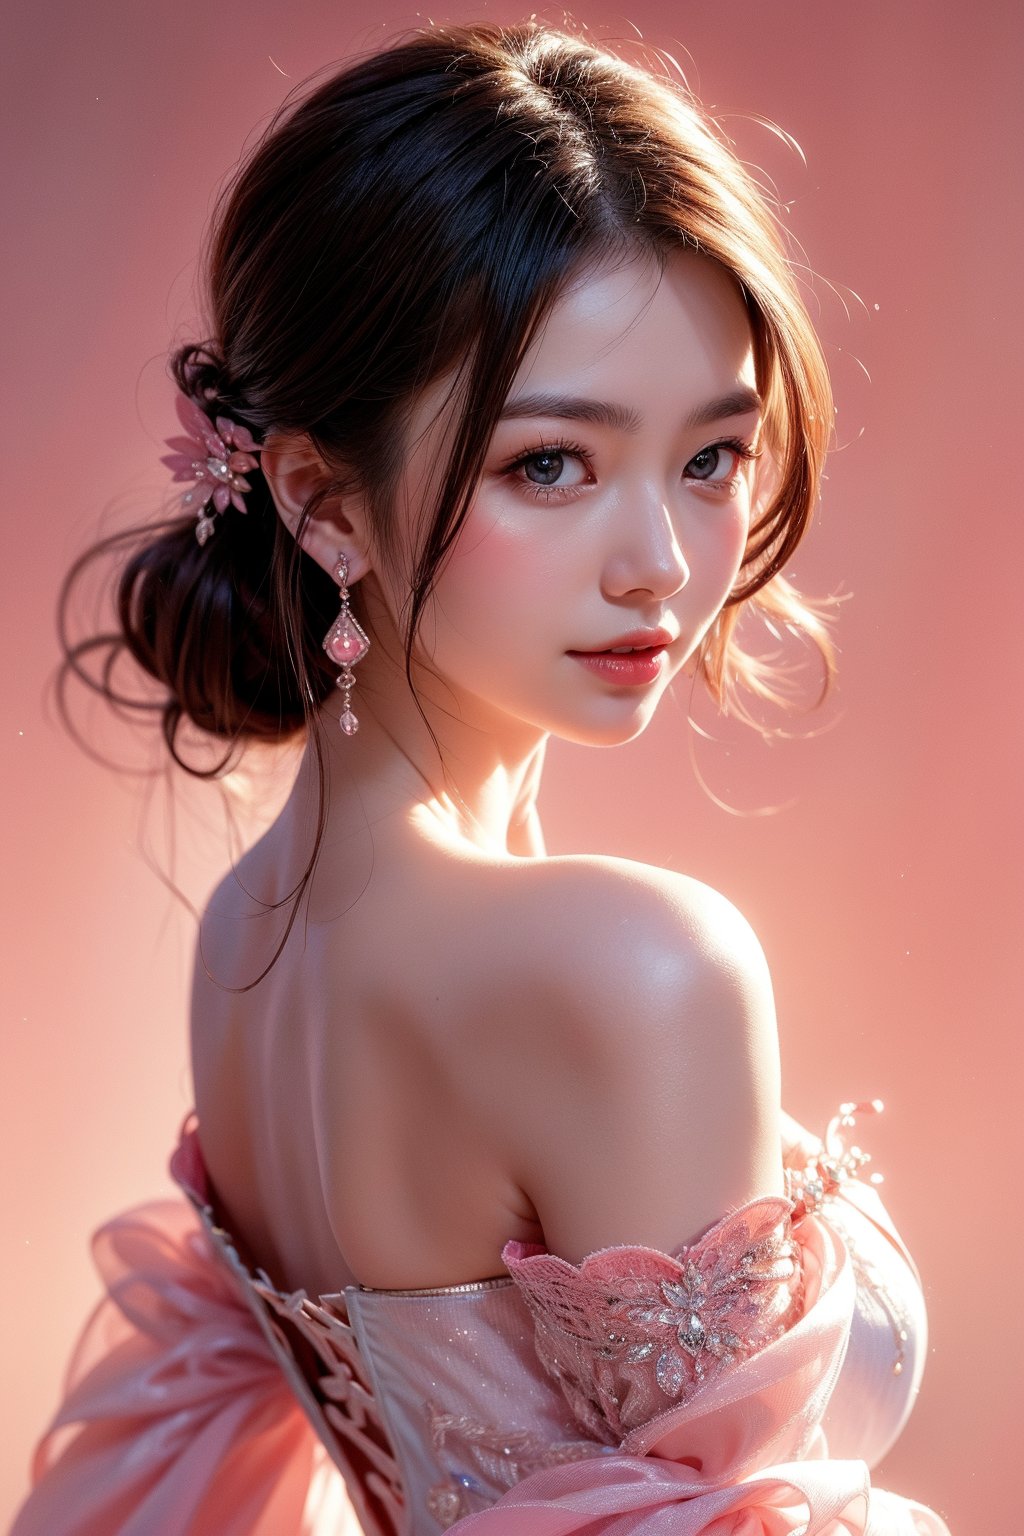 This photo is done in a modern, high-fashion style and could be the work of a contemporary portrait photographer.  It features a centered composition of a young Taiwanese woman standing in front of a solid pink background.  She wore an elegant off-the-shoulder pink gown with delicate lace patterns and rhinestone detailing.  Her dark hair was neatly styled and she accessorized with pearl earrings and a simple ring.  This image emphasizes softness and elegance, highlighted by soft tones and soft light, creating a dreamy atmosphere.  The woman's gentle smile and relaxed posture enhance the elegance and tranquil beauty of the entire portrait.